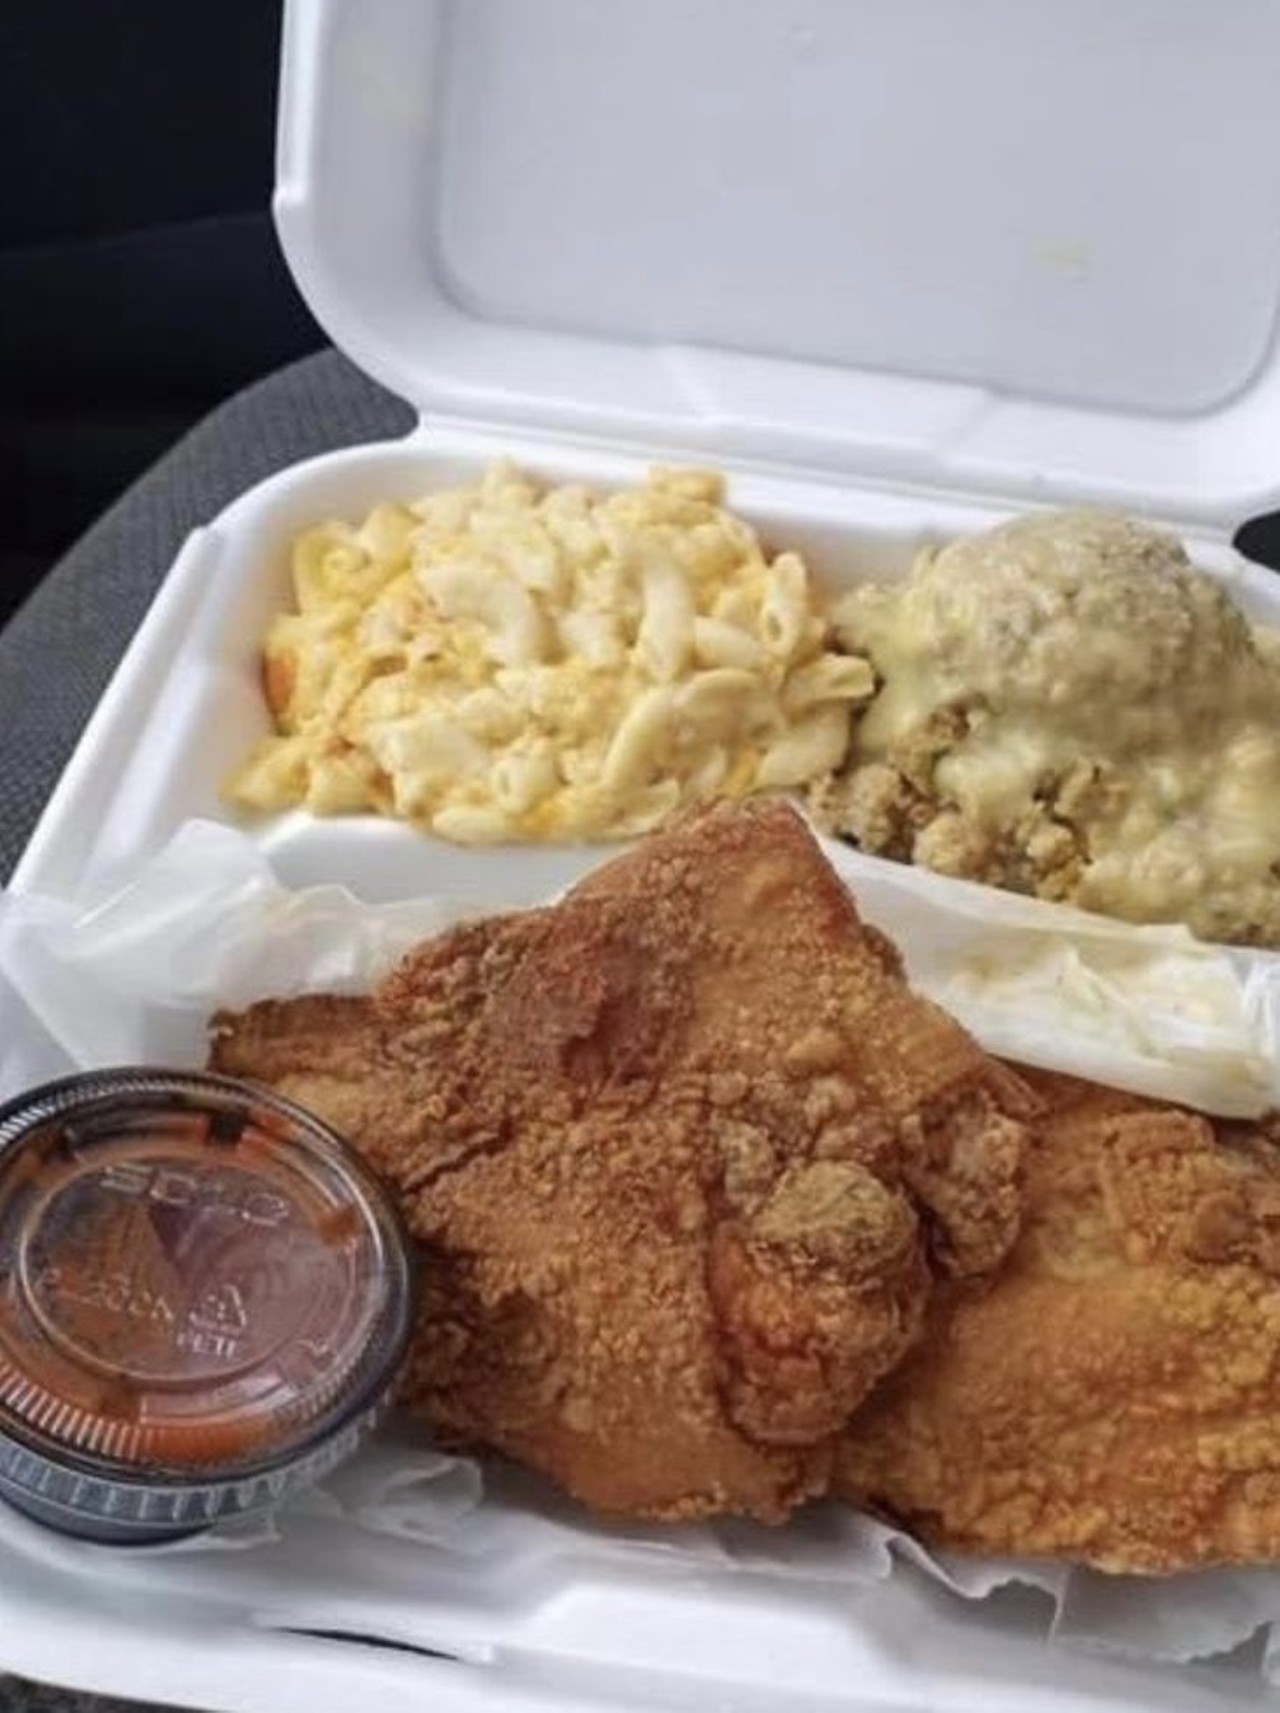 Moore Soulfood
3005 S. Fort St., Detroit; 313-406-9475
&#147;I demolished the catfish,Mac & cheese and greens. So flavorful and the catfish was fried to perfection.
The staff was friendly. I called in my order and it was ready within 15 minutes.&#148; - C R.
Photo via Google Maps